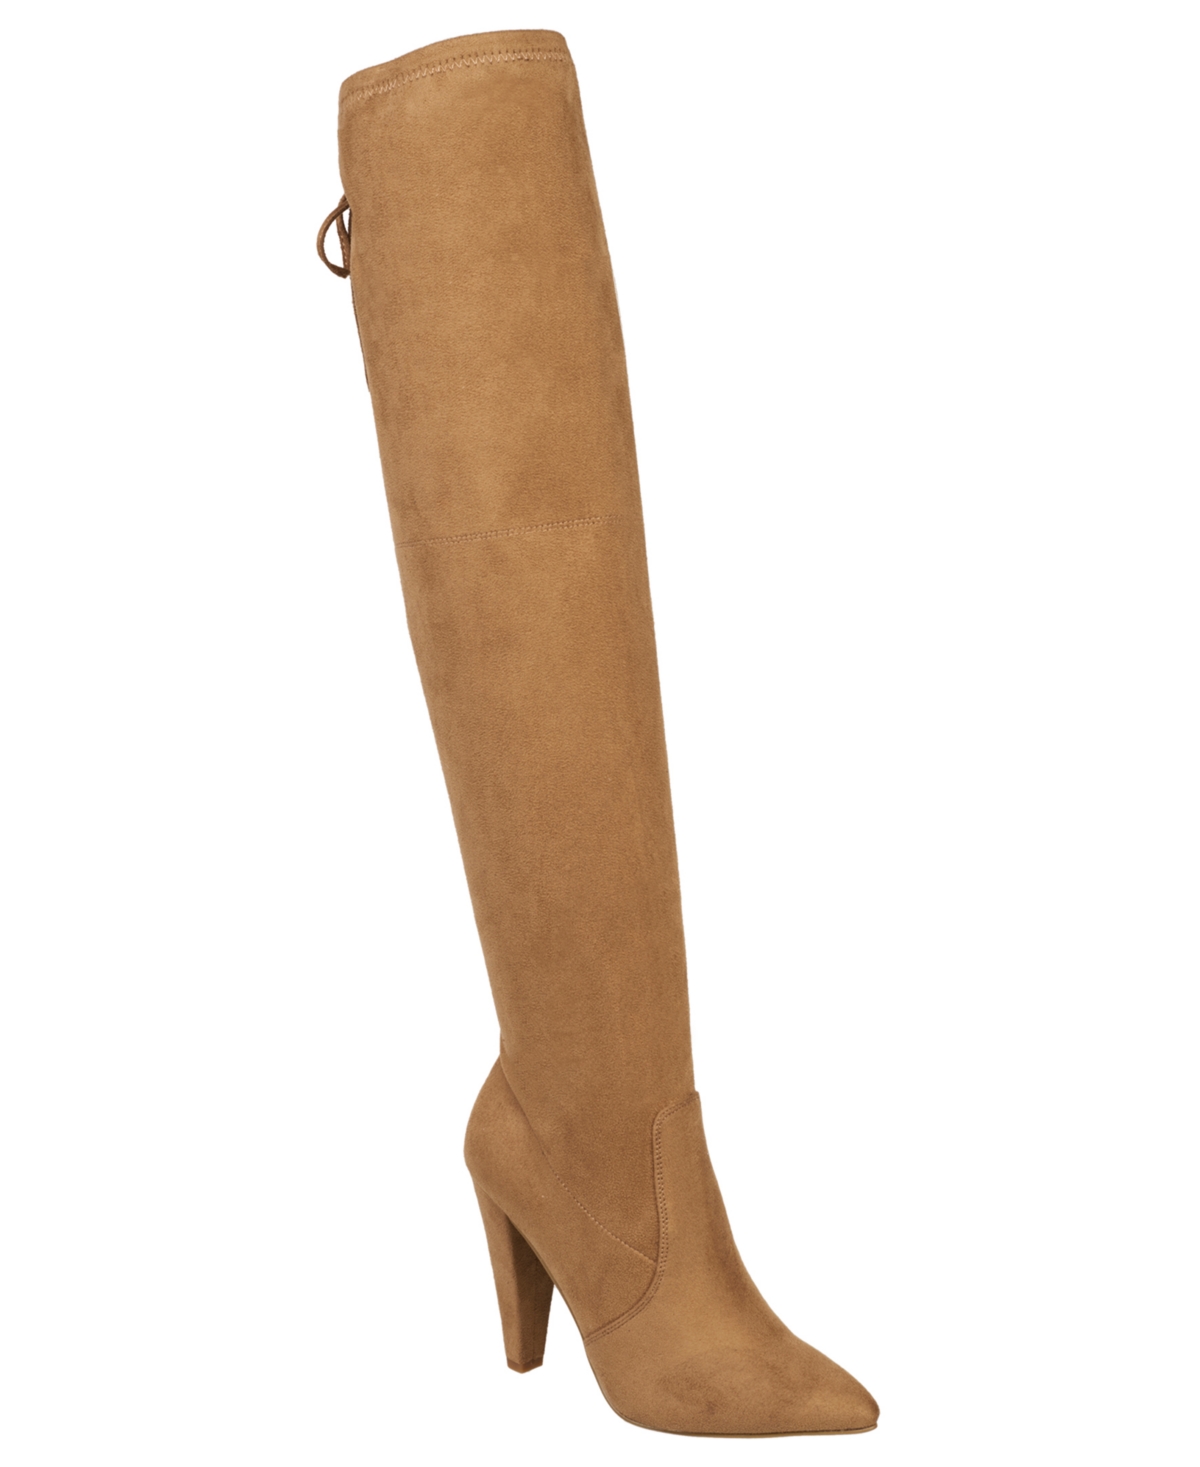 Women's Jordan Cone Heel Lace-up Over-The-Knee Boots - Tan- Faux Leather